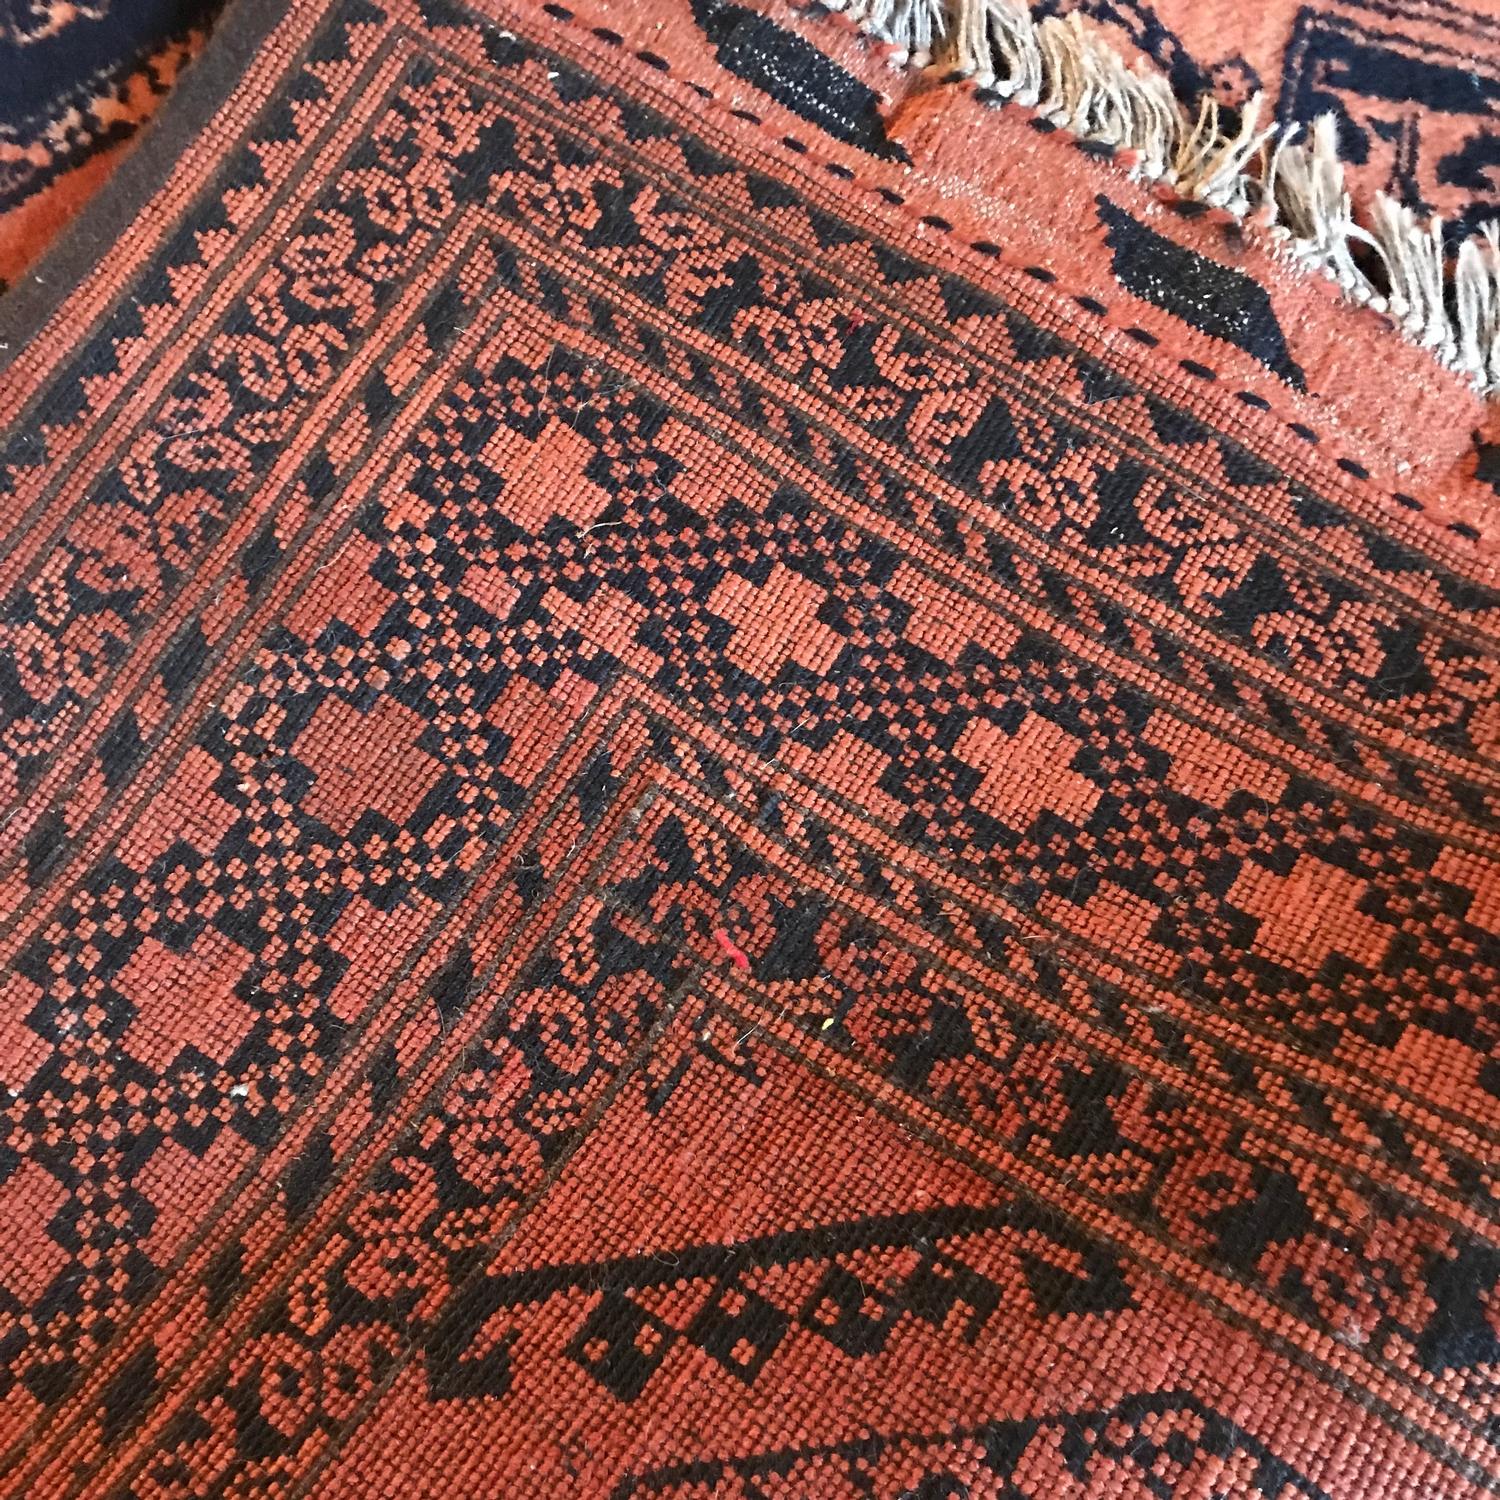 A Large Persian hand made livingroom rug. Measures 300x210cm - Image 3 of 4